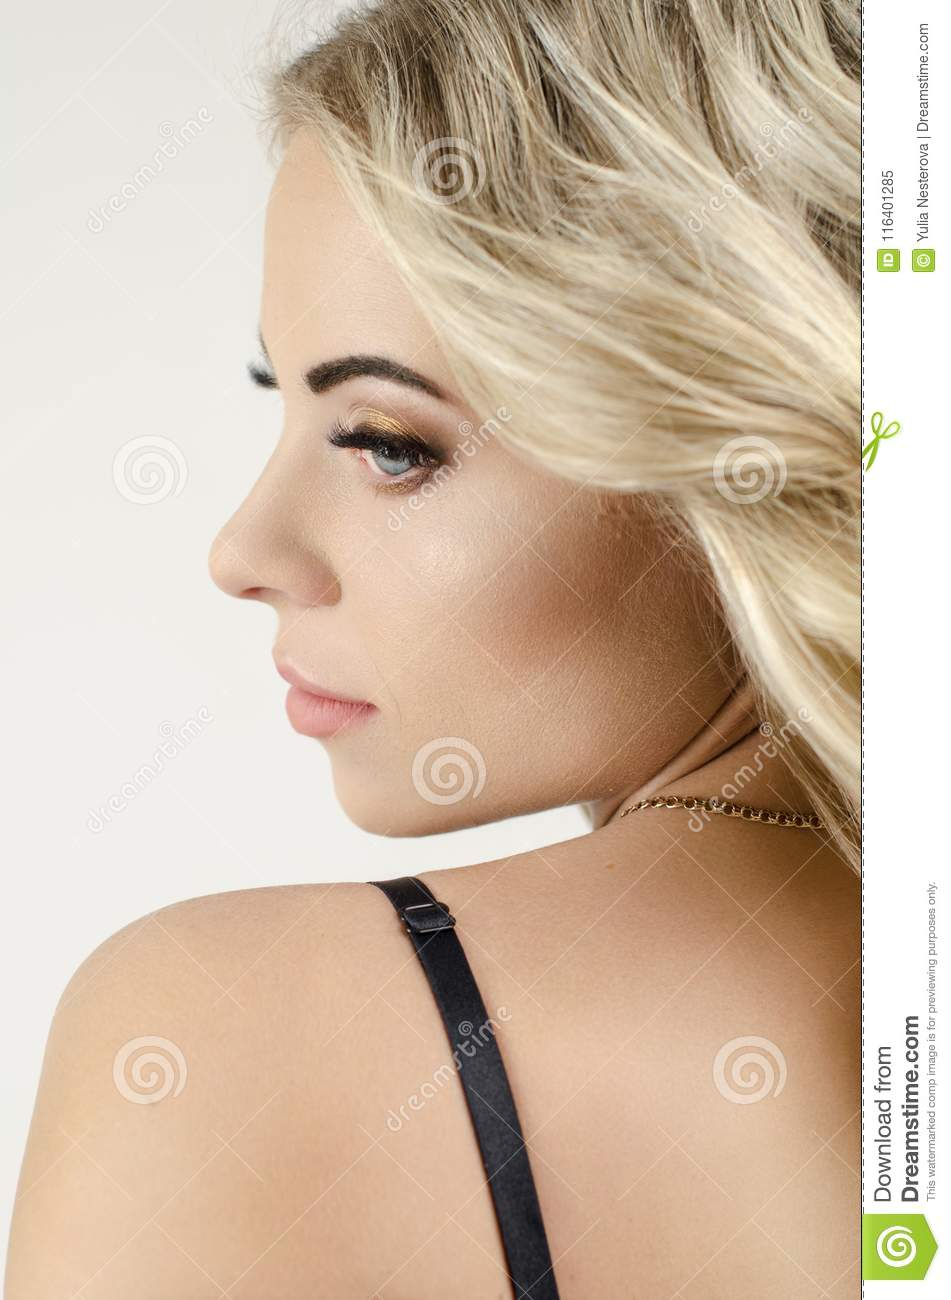 Makeup For Blue Eyes Blonde Hair Beautiful Blonde Girl In Lace Underwear Stock Image Image Of